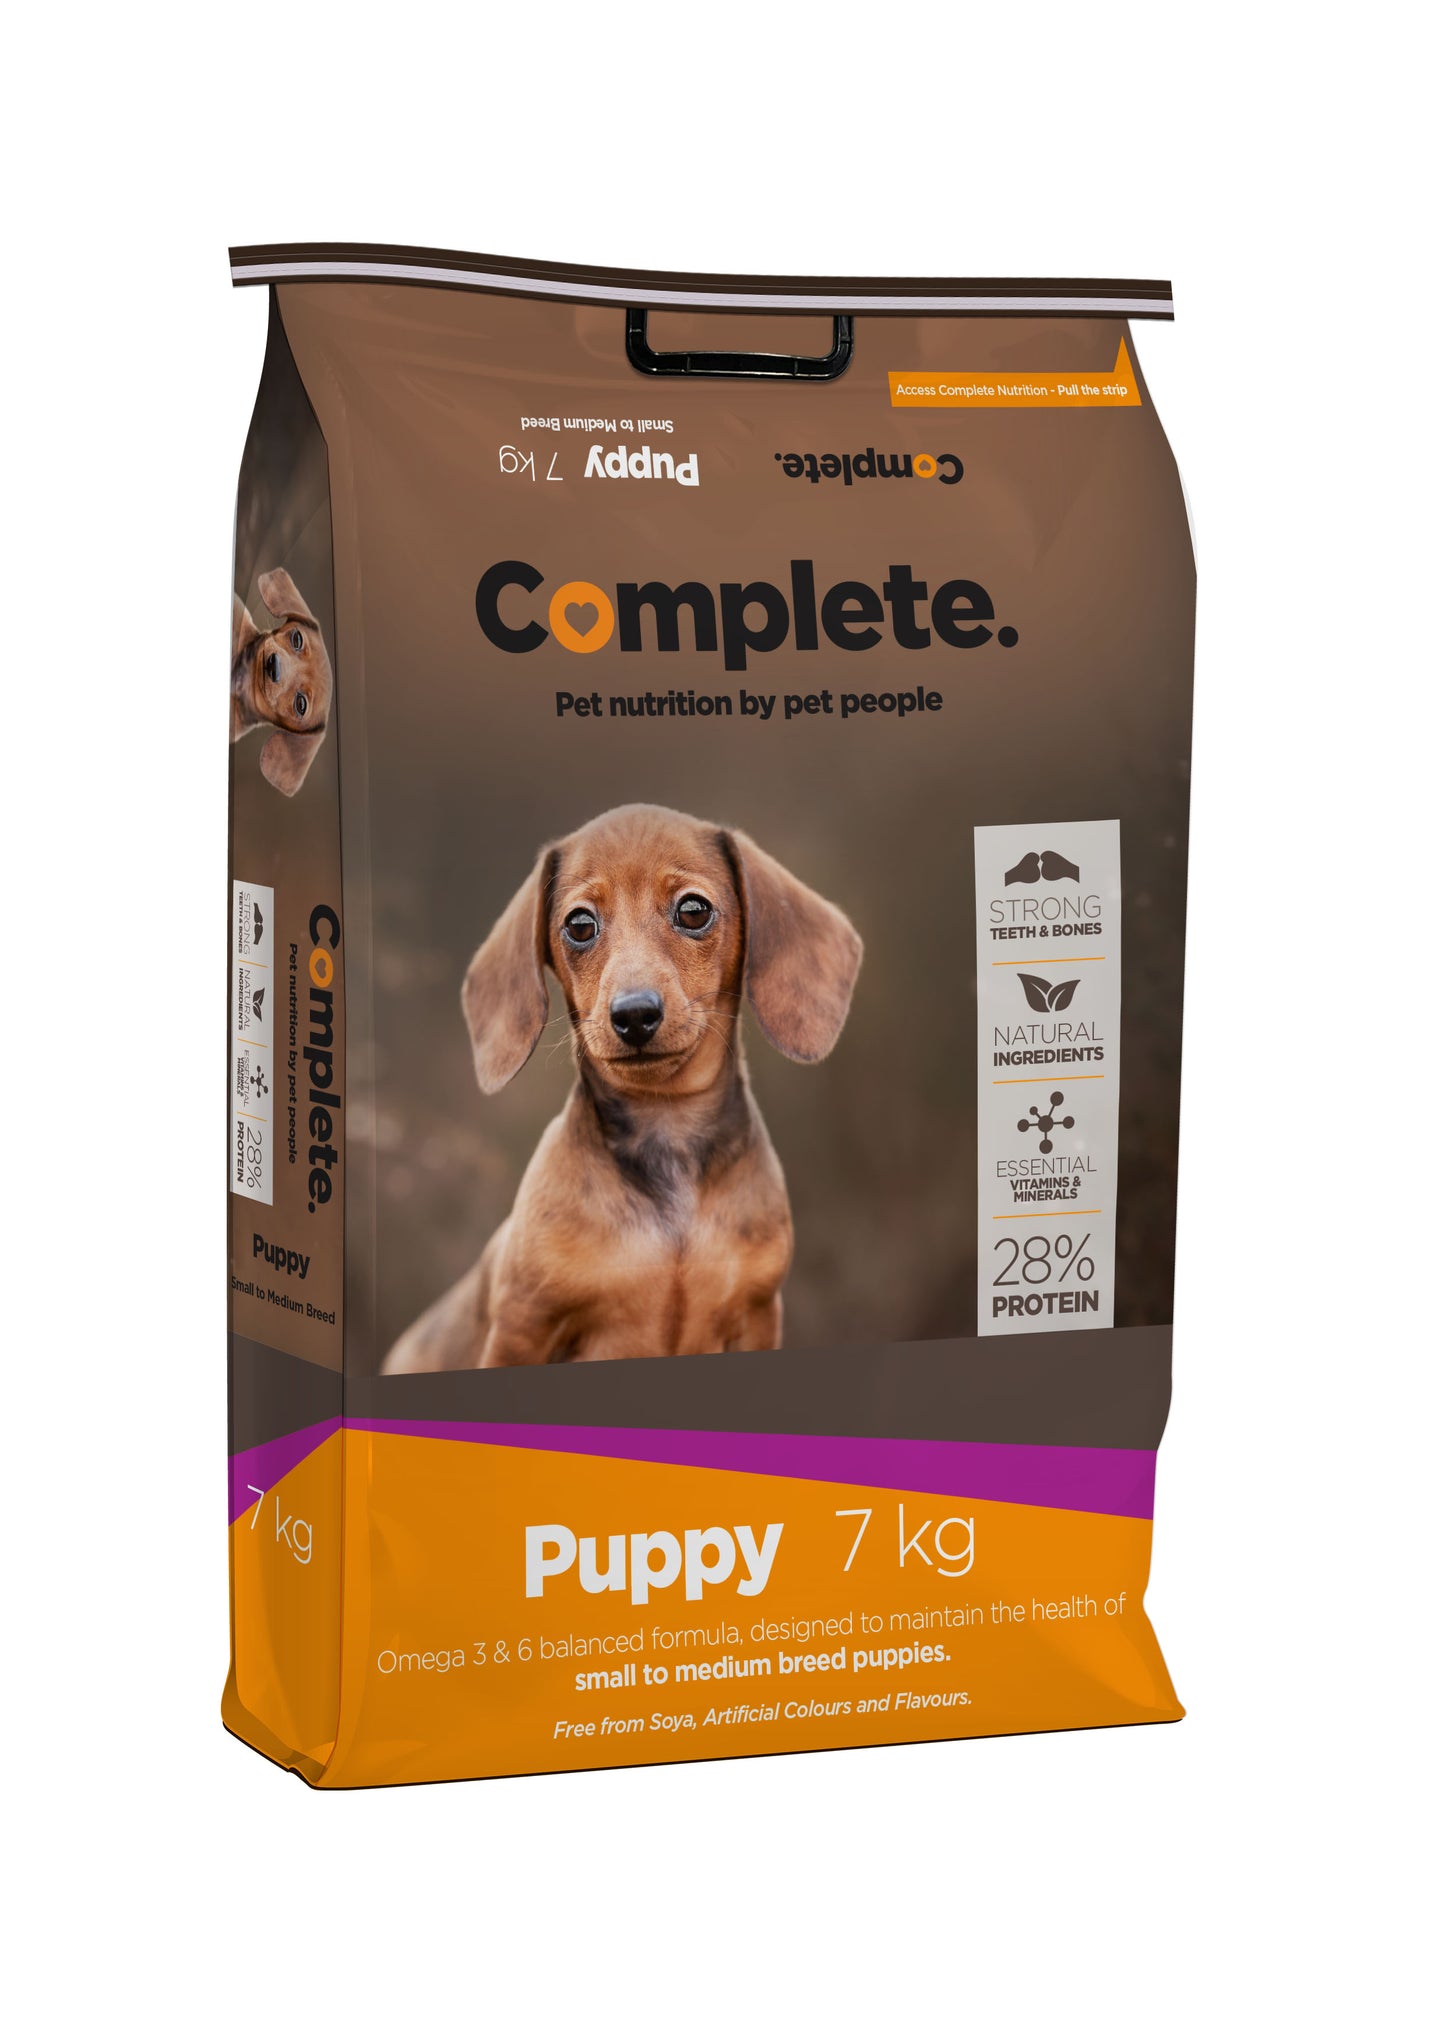 Puppy 7kg Complete Pet Food For Small to Medium breed puppies from Pets Planet - South Africa’s Best Online Pet Store for premium pet products, best pet store near me, Dog food, puppy food, dog food for puppies, pet food, dog wet food, dog bed, dog beds, washable dog bed, takealot dog bed, Complete Pet Nutrition, Complete pet nutrition dog food, hills dog food, optimizor dog food, royal canin dog food, jock dog food, bobtail dog food, canine cuisine, acana dog food, best dog food